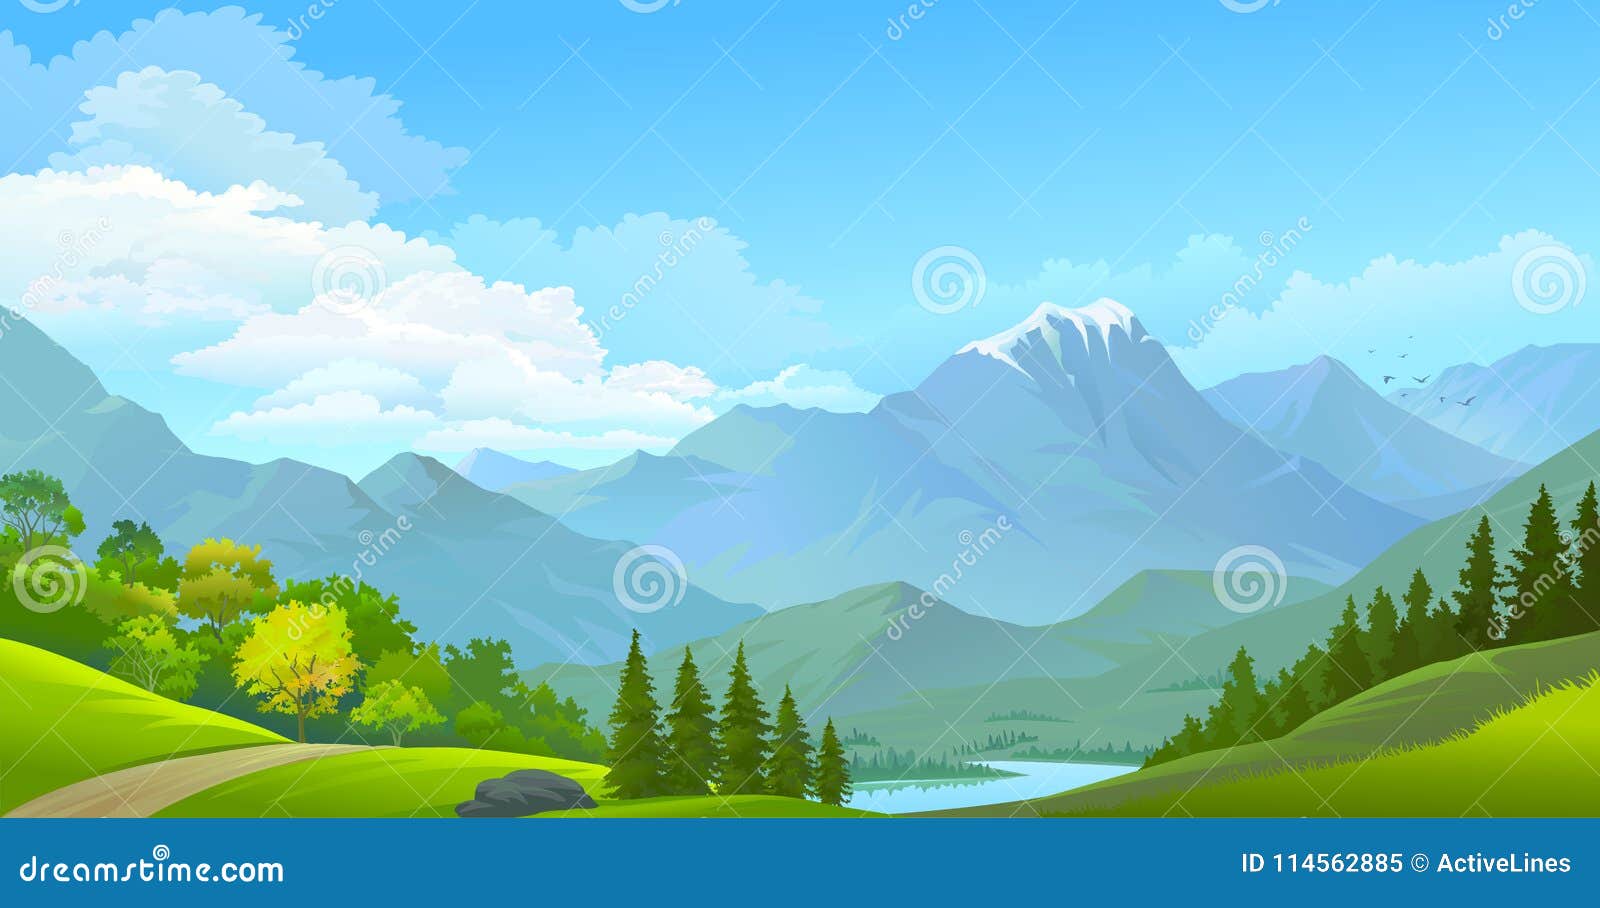 landscape view of snow covered mountains, green meadows and a river